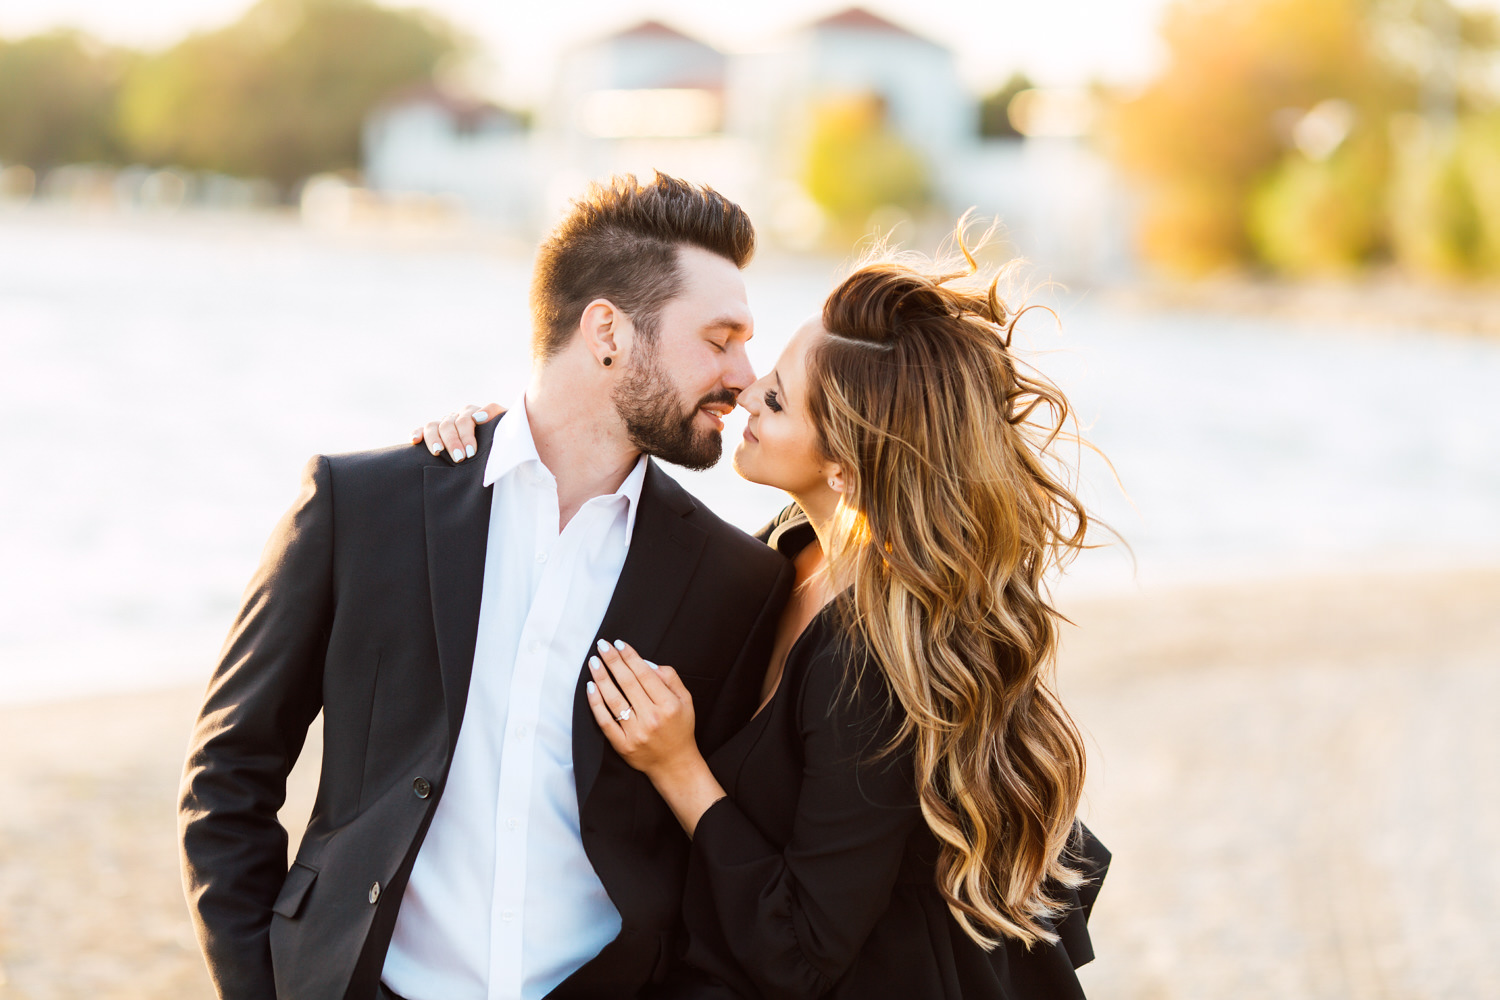 25 Non-Cheesy Poses for your Engagement Shoot